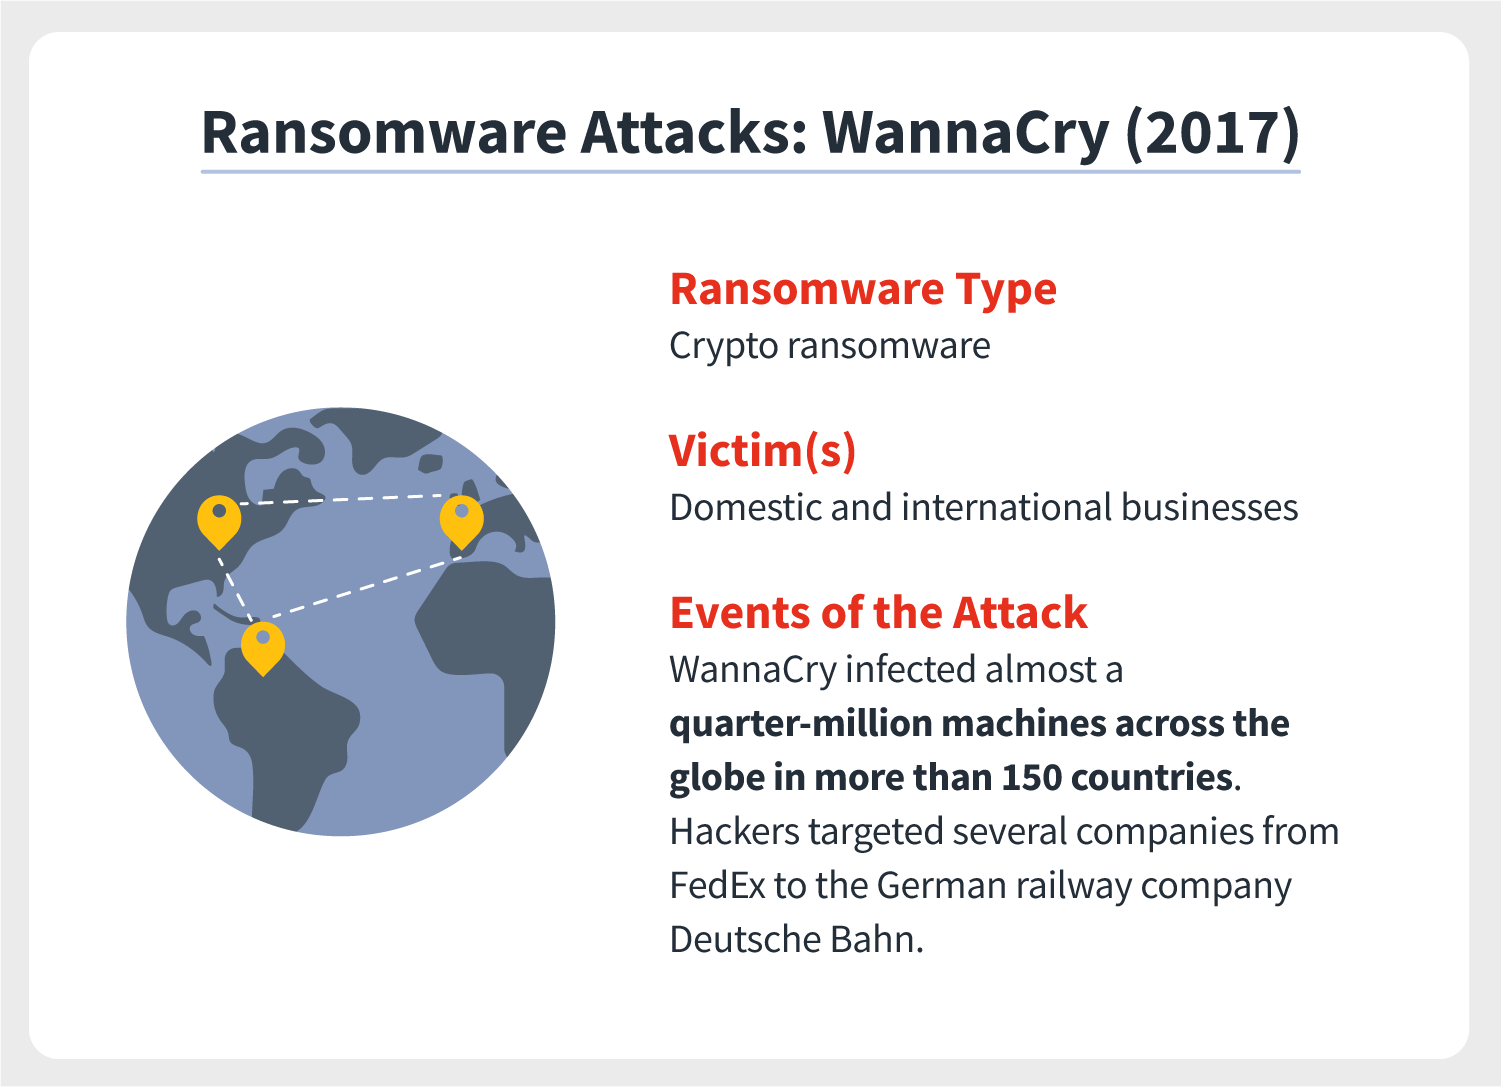 An illustration accompanies information regarding a WannaCry ransomware attack that took place in 2017.